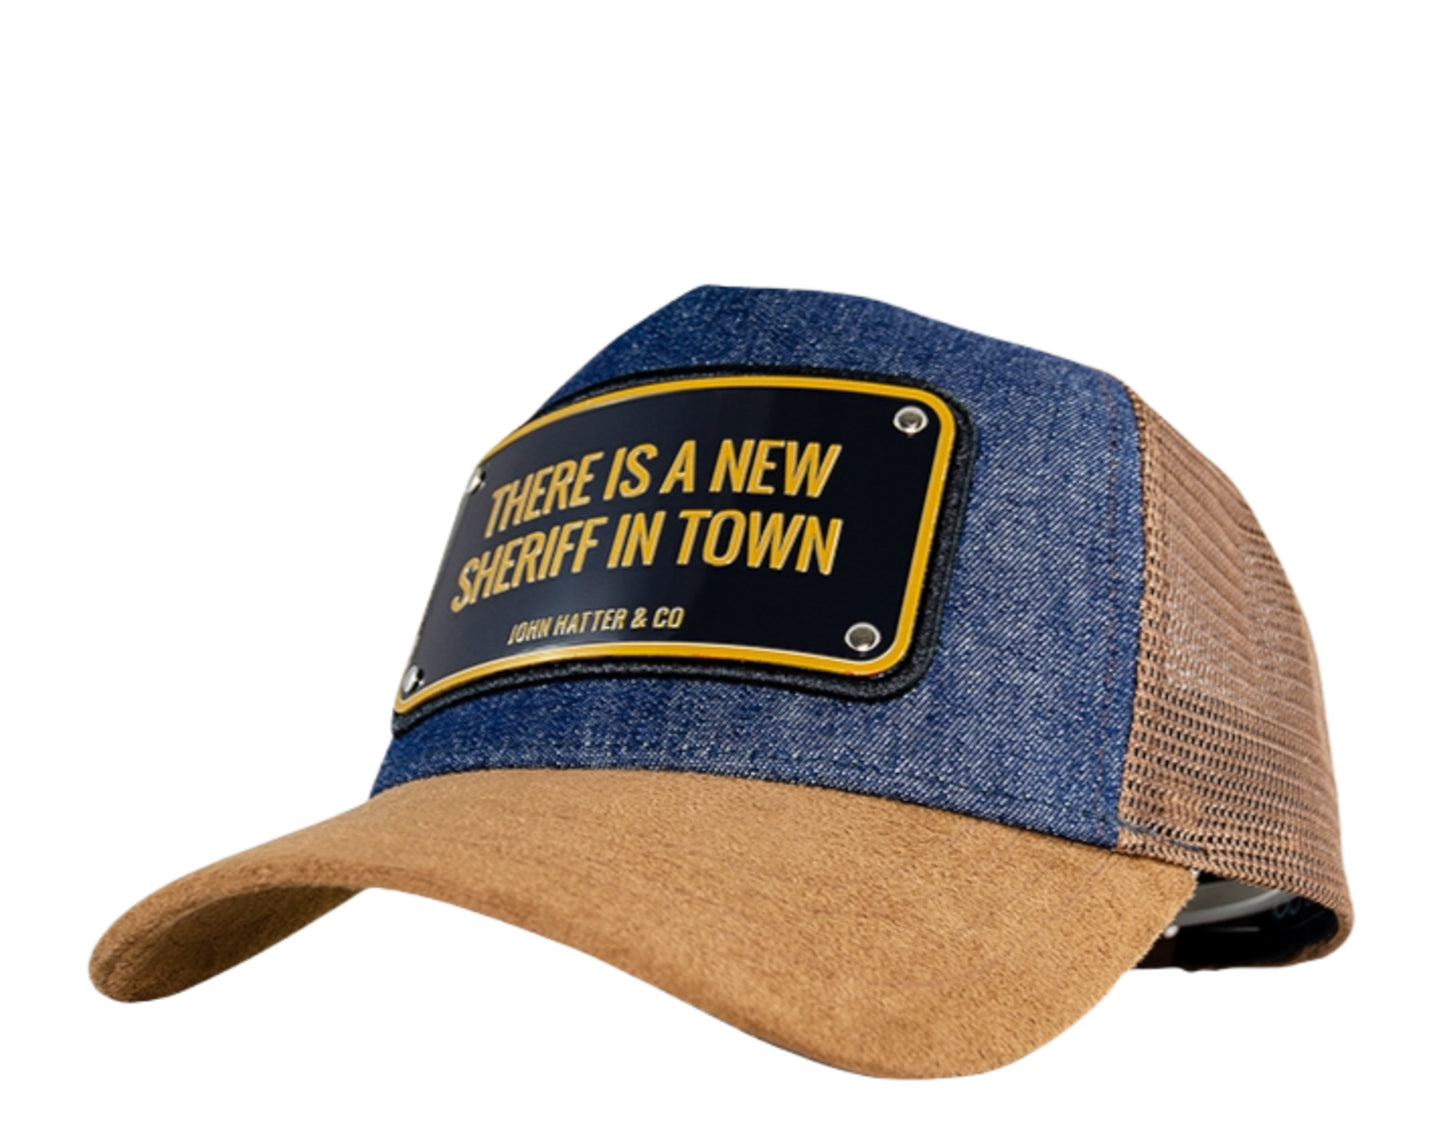 John Hatter & Co There Is A New Sheriff In Town Trucker Hat